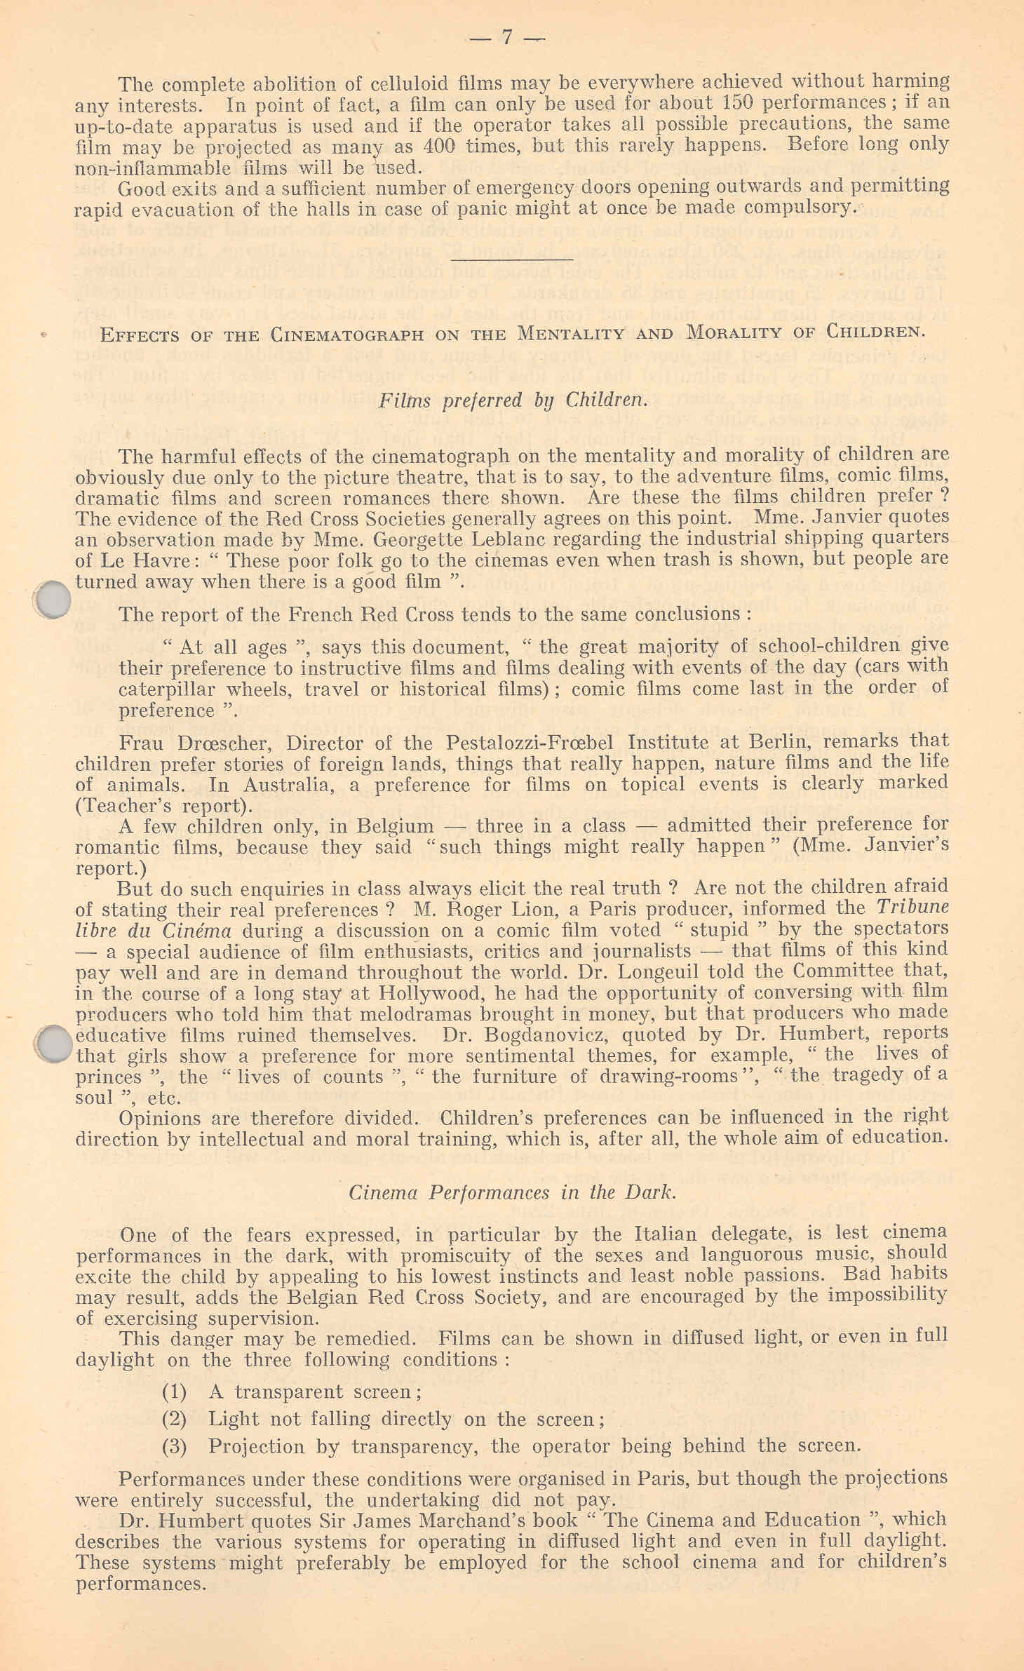 Extract from report of the League of Nations Child Welfare Committee, 1928